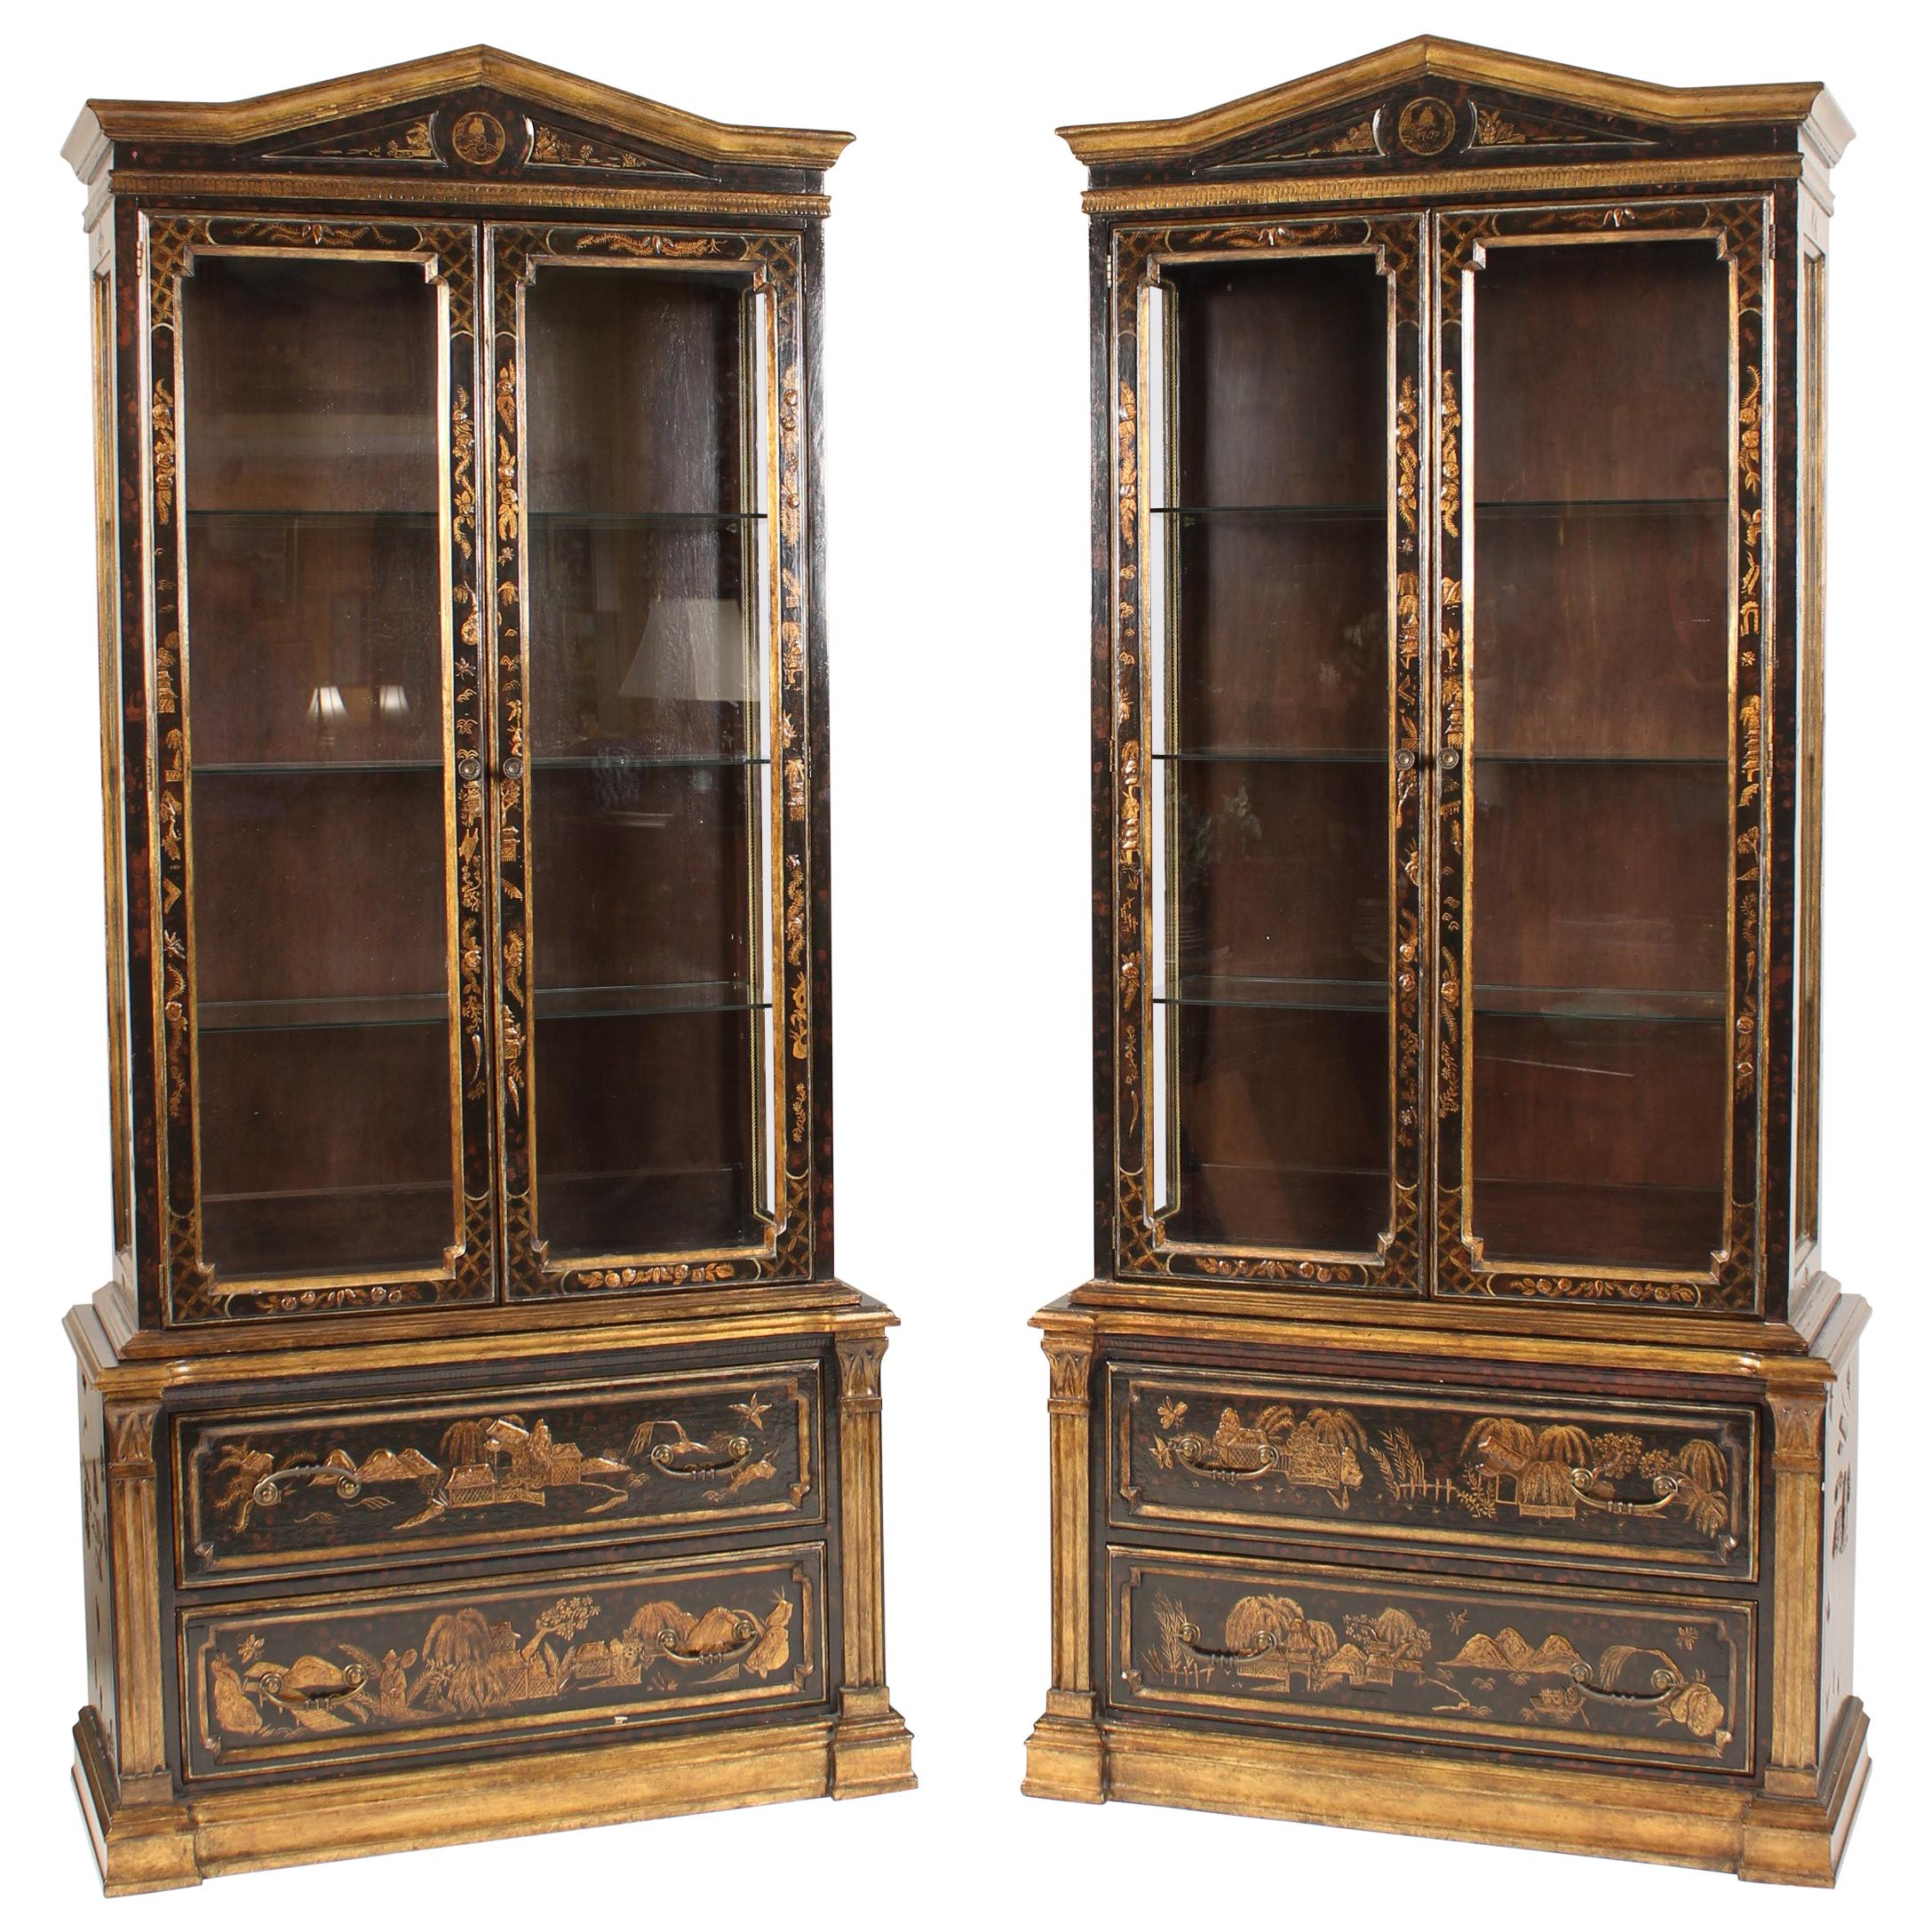 Pair of George III Style Chinoiserie Decorated Display Cabinets